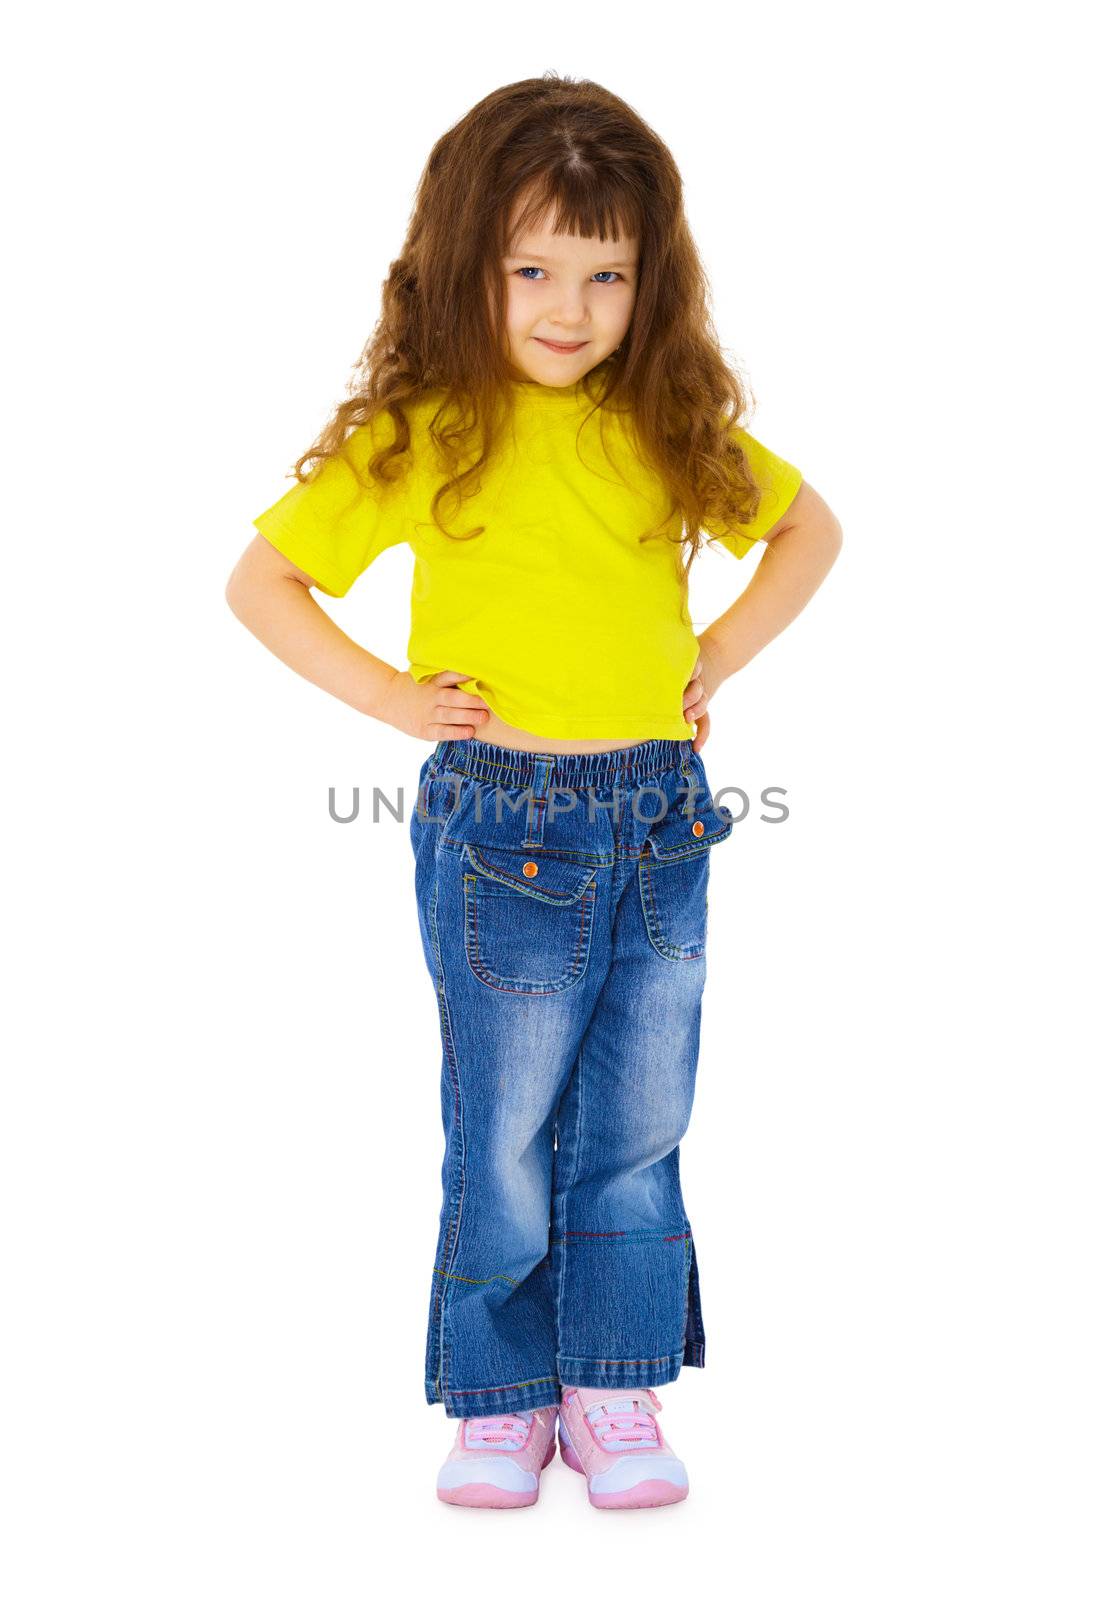 Little girl in jeans on white background by pzaxe